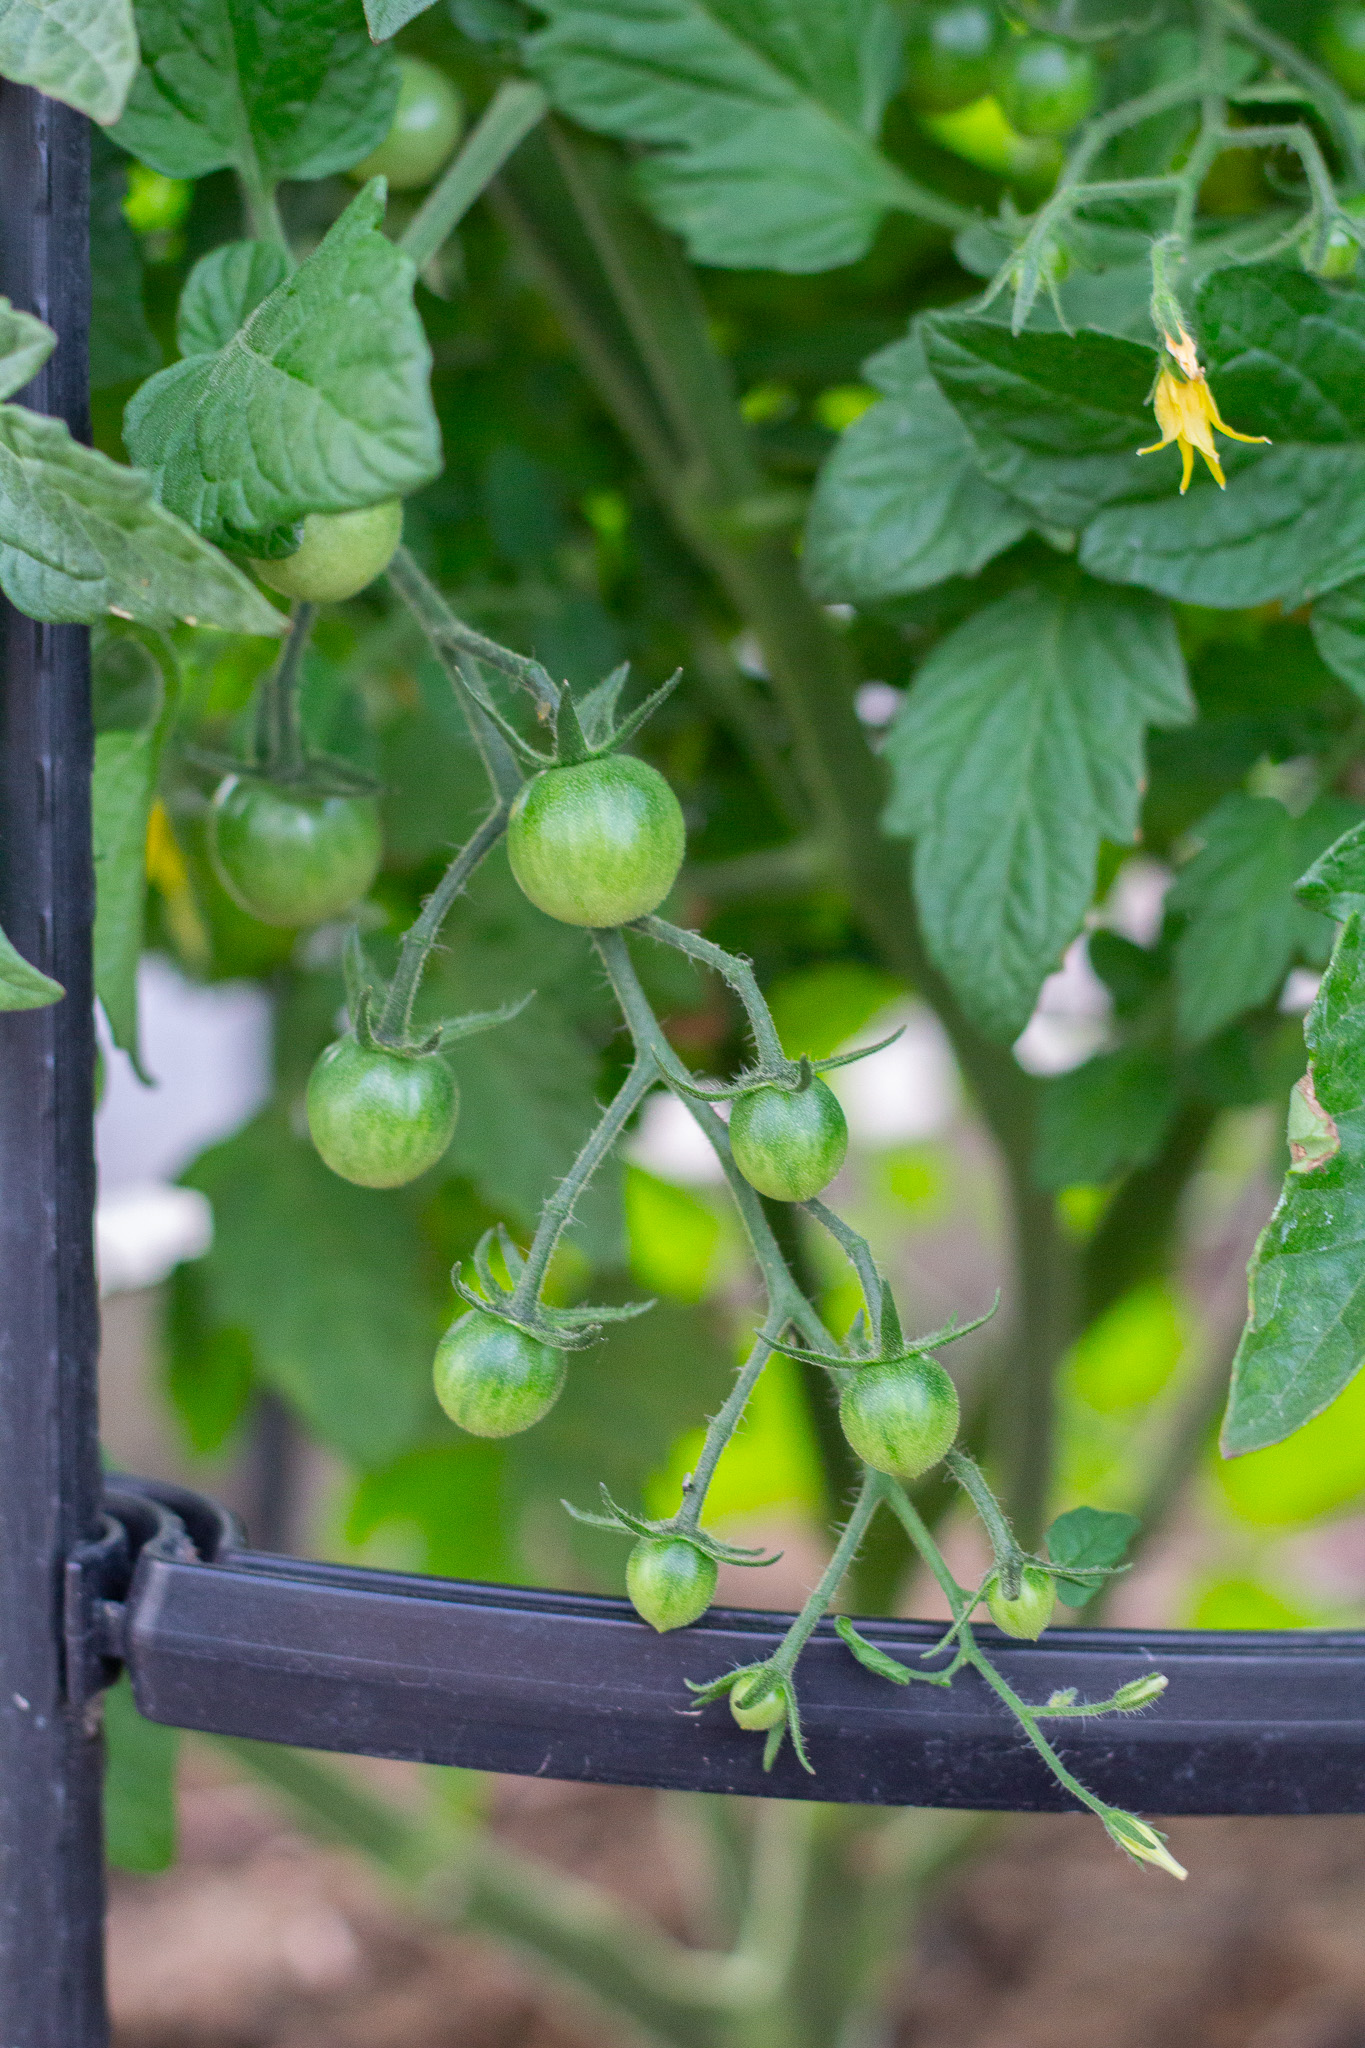 Tips for Growing Healthy Tomatoes